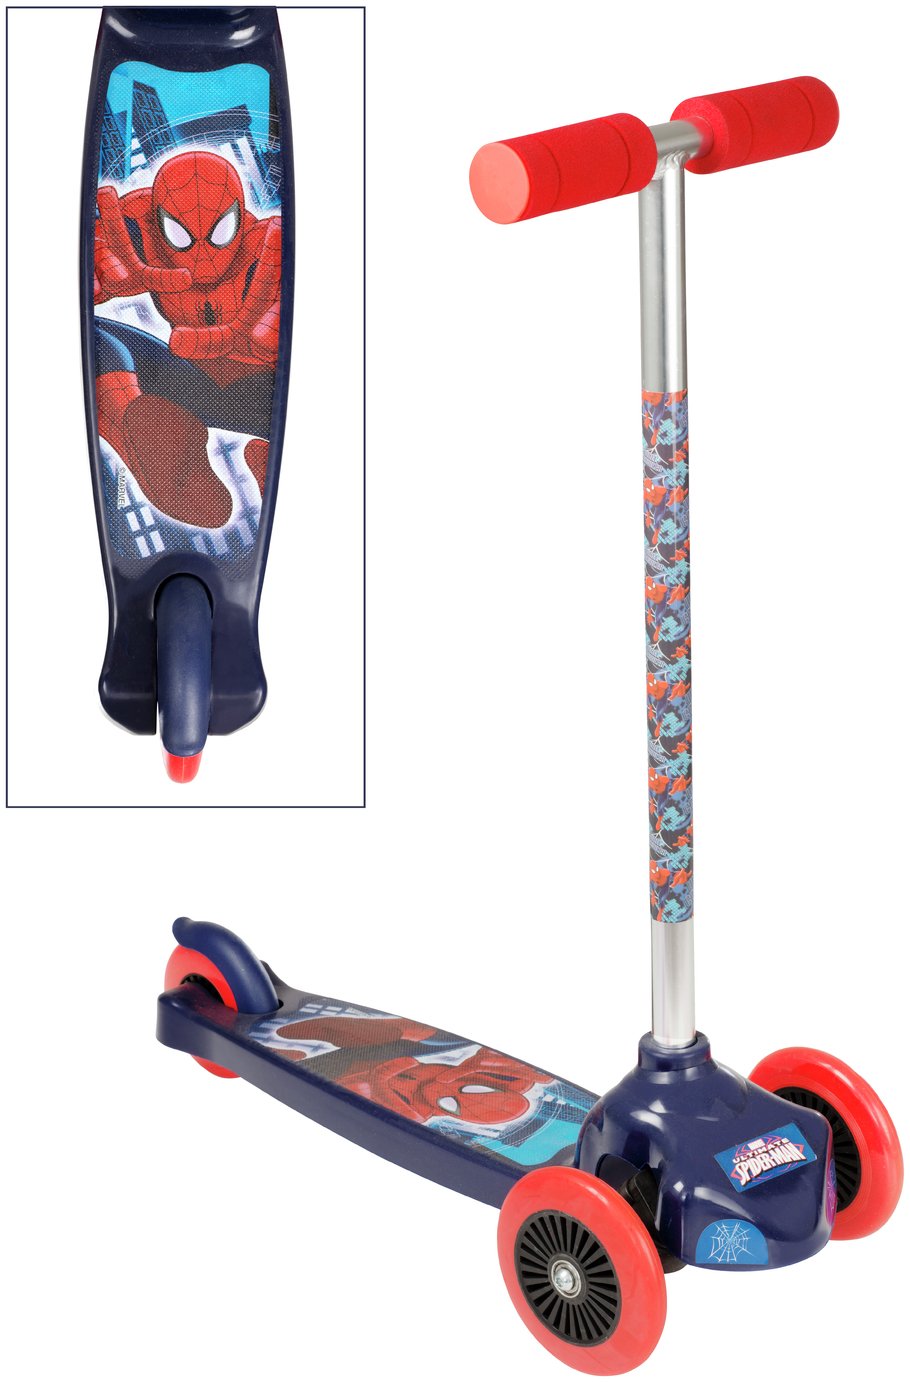 Move 'N' Groove Marvel Spider-Man Scooter